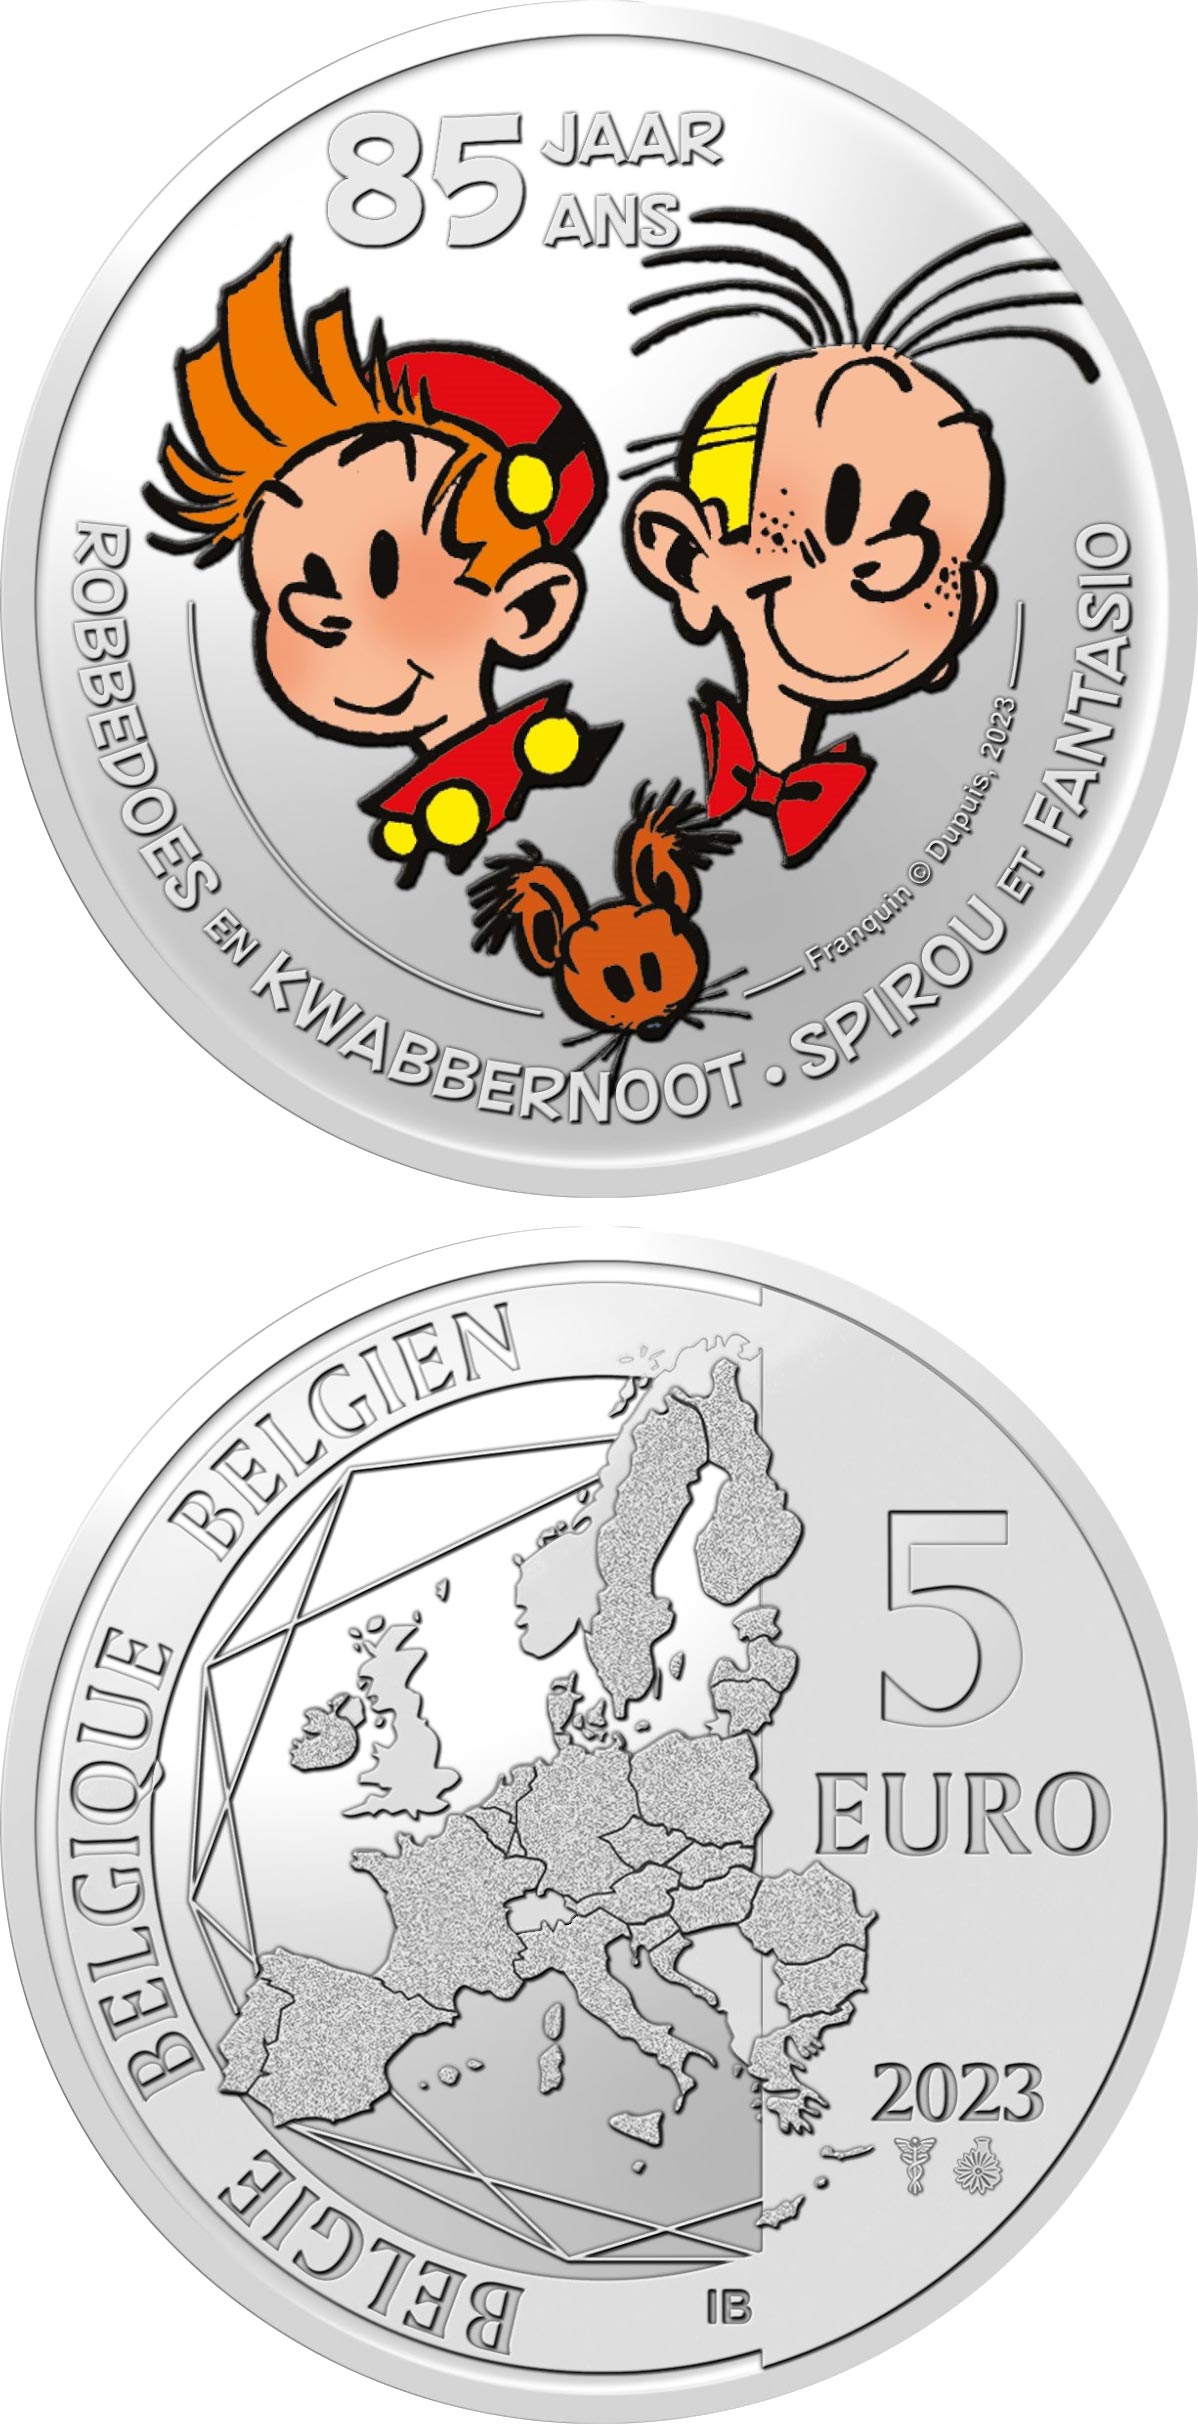 Image of 5 euro coin - 85 years Spirou and Fantasio | Belgium 2023.  The Copper–Nickel (CuNi) coin is of BU quality.